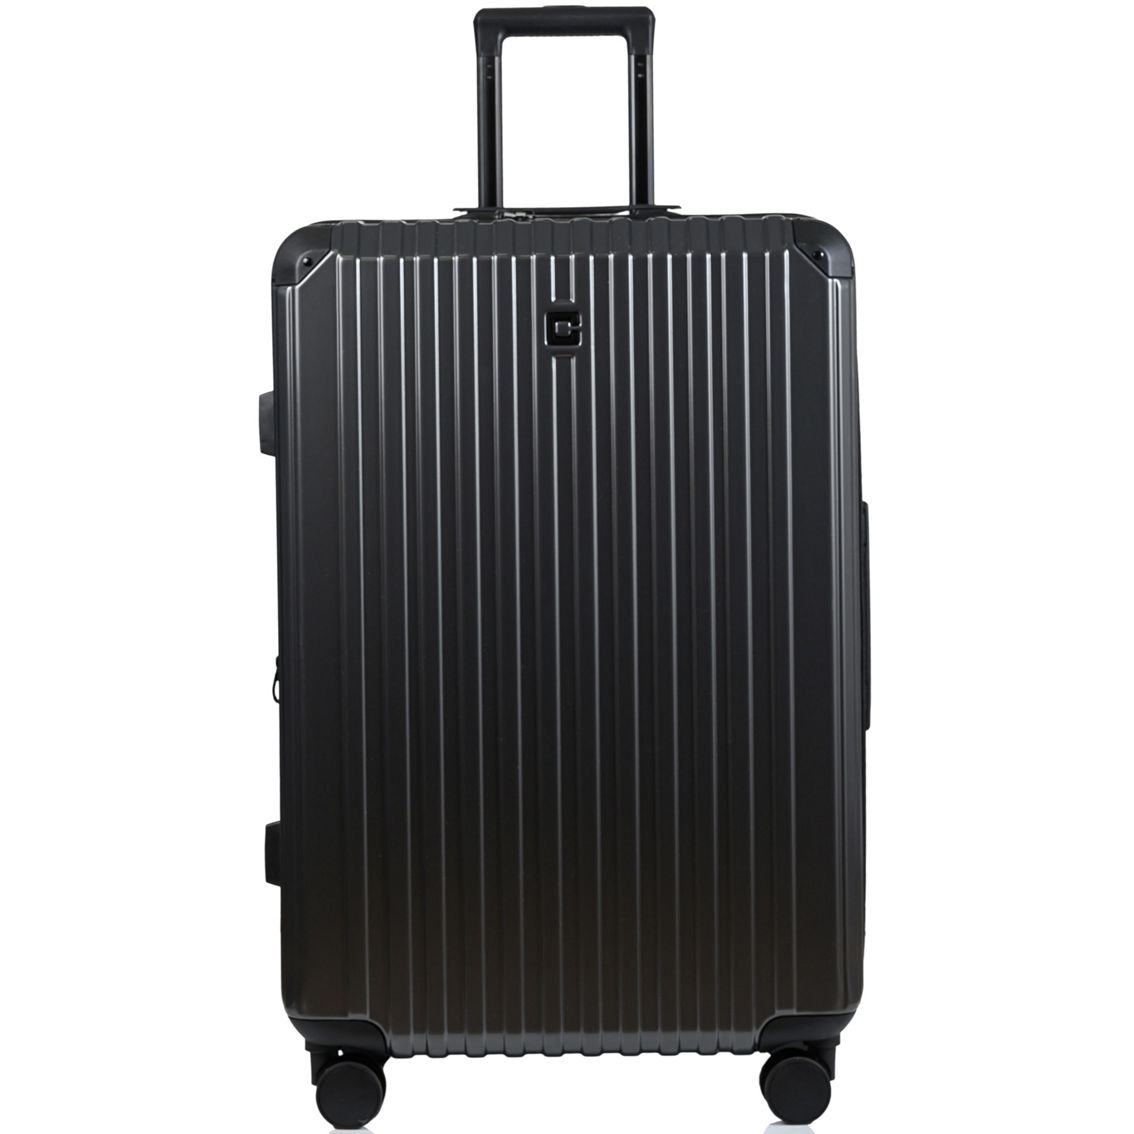 CHAMPS Element Collection 3 Piece Luggage Set, Black - Image 2 of 5